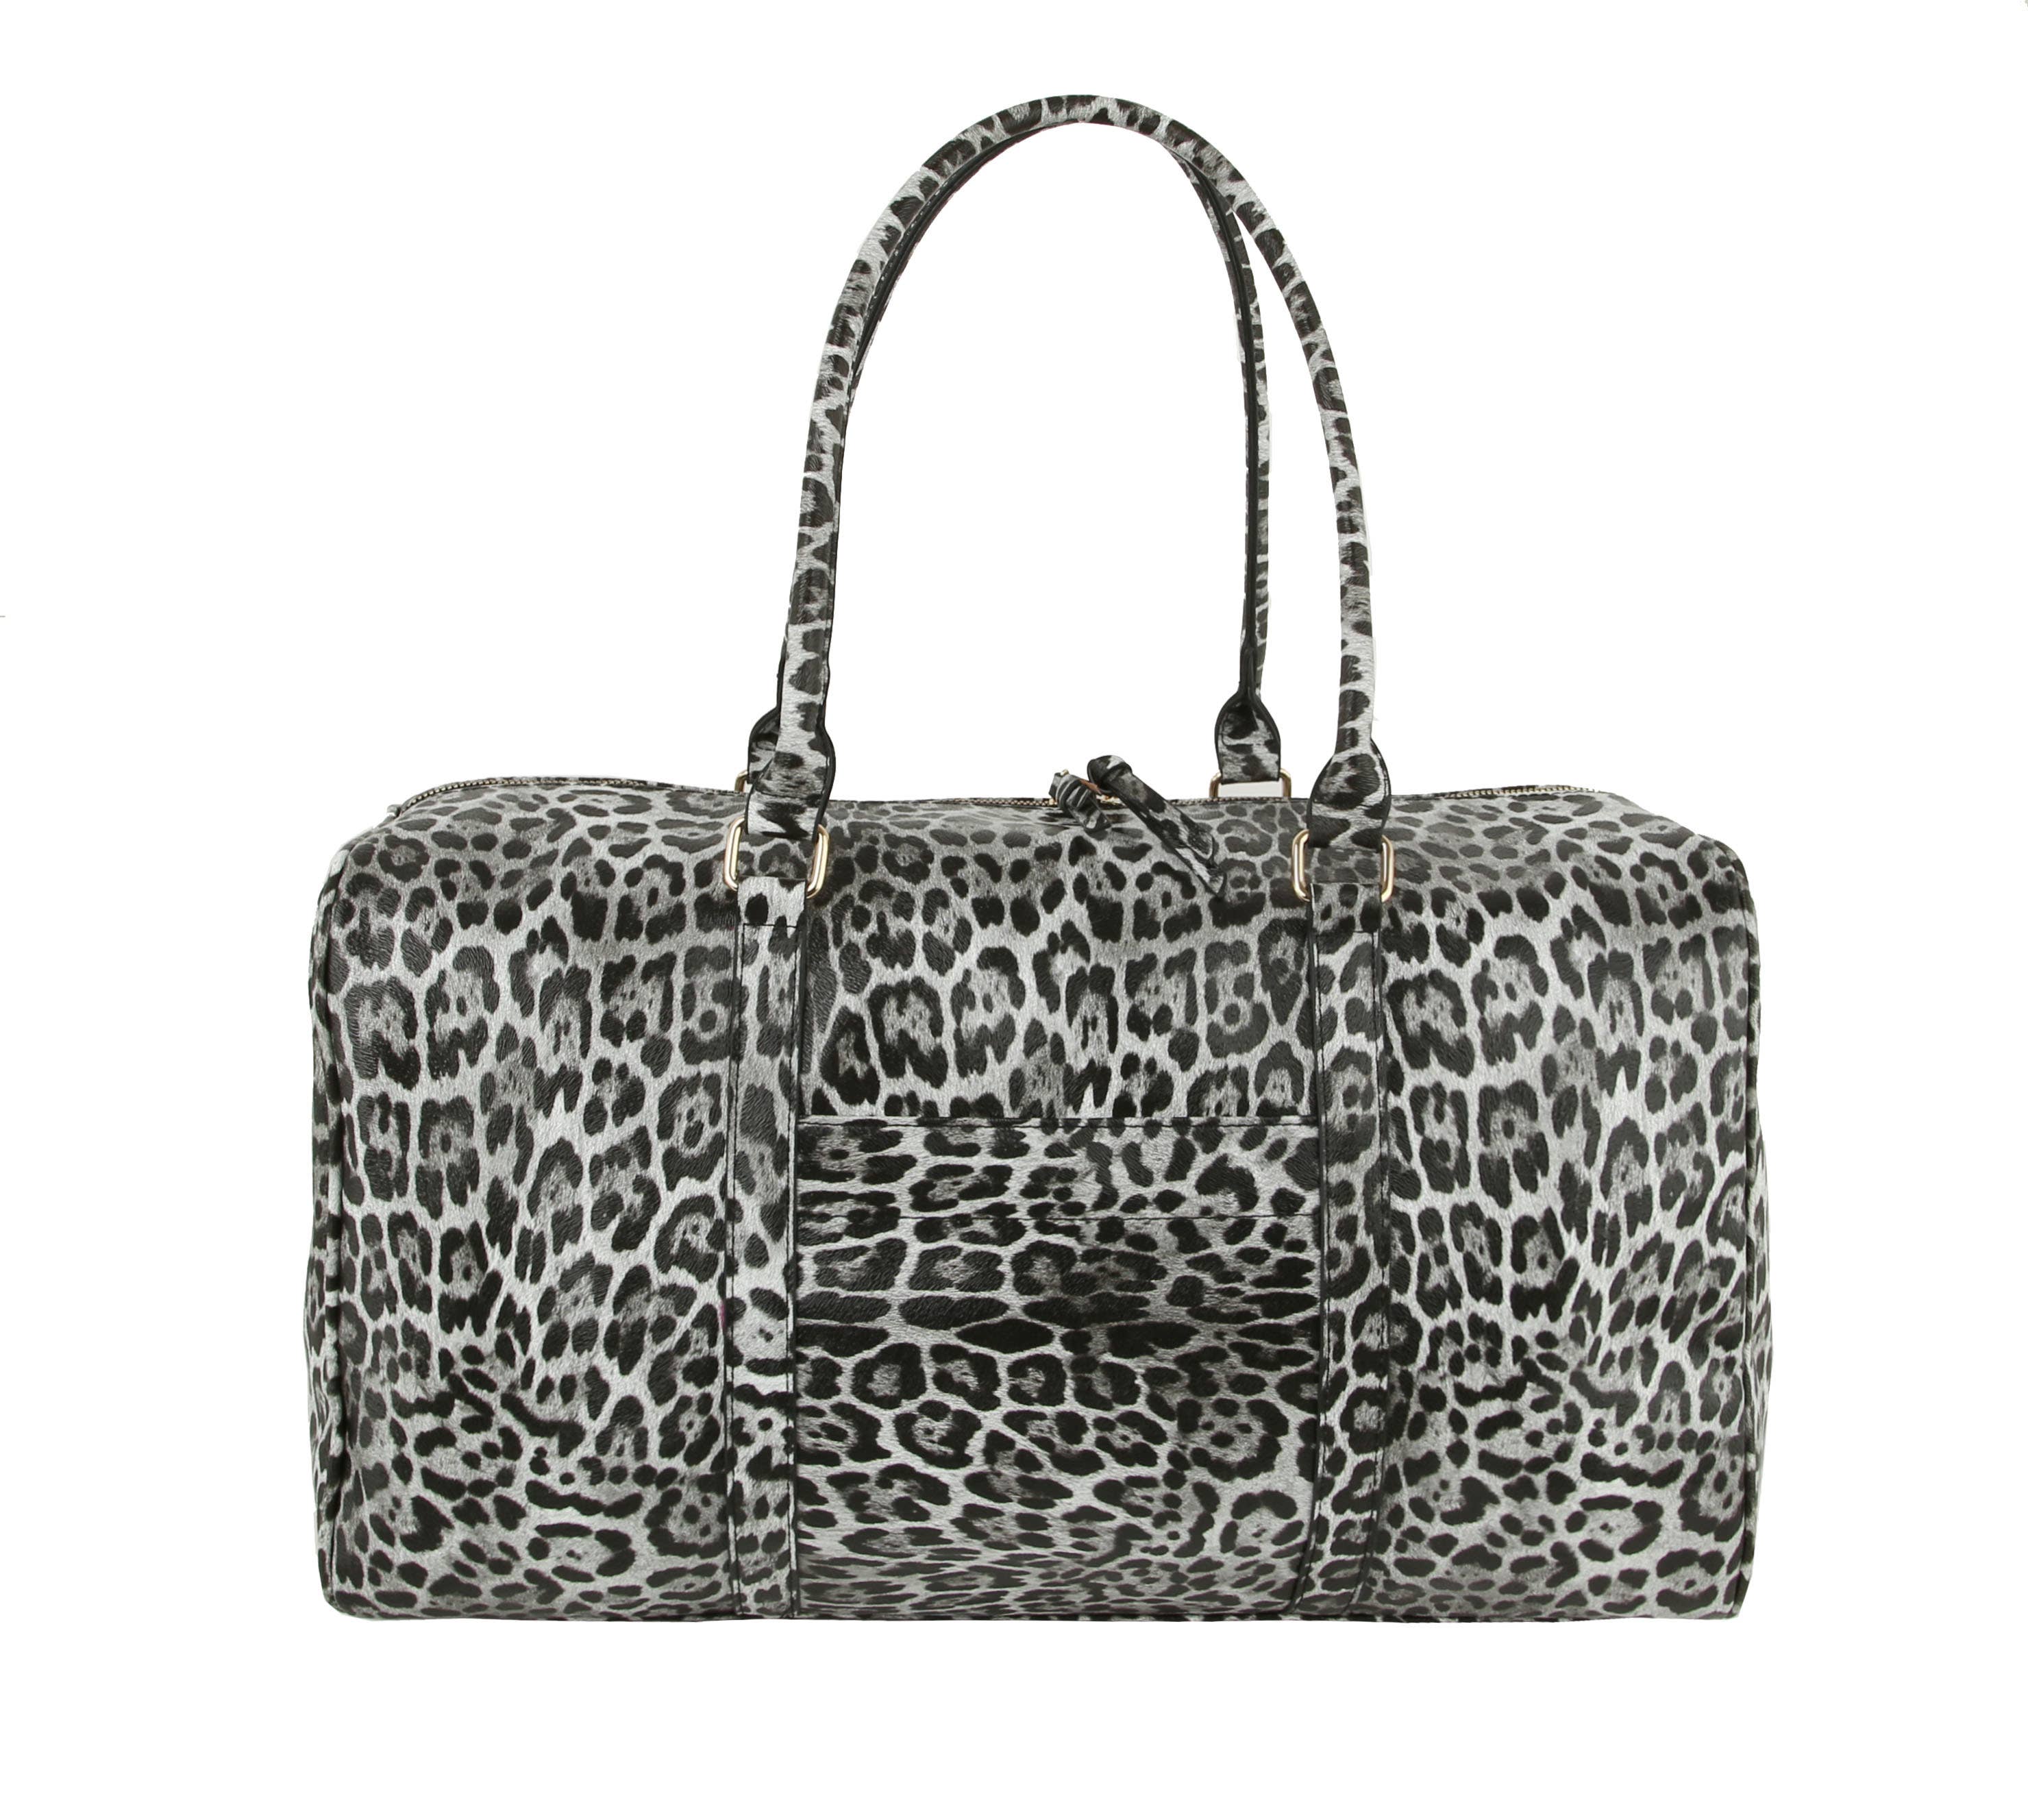 Duffle Bag with faux leather ostrich crocodile print. Detachable shoulder strap, luggage-handle sleeve and zip top closure. 